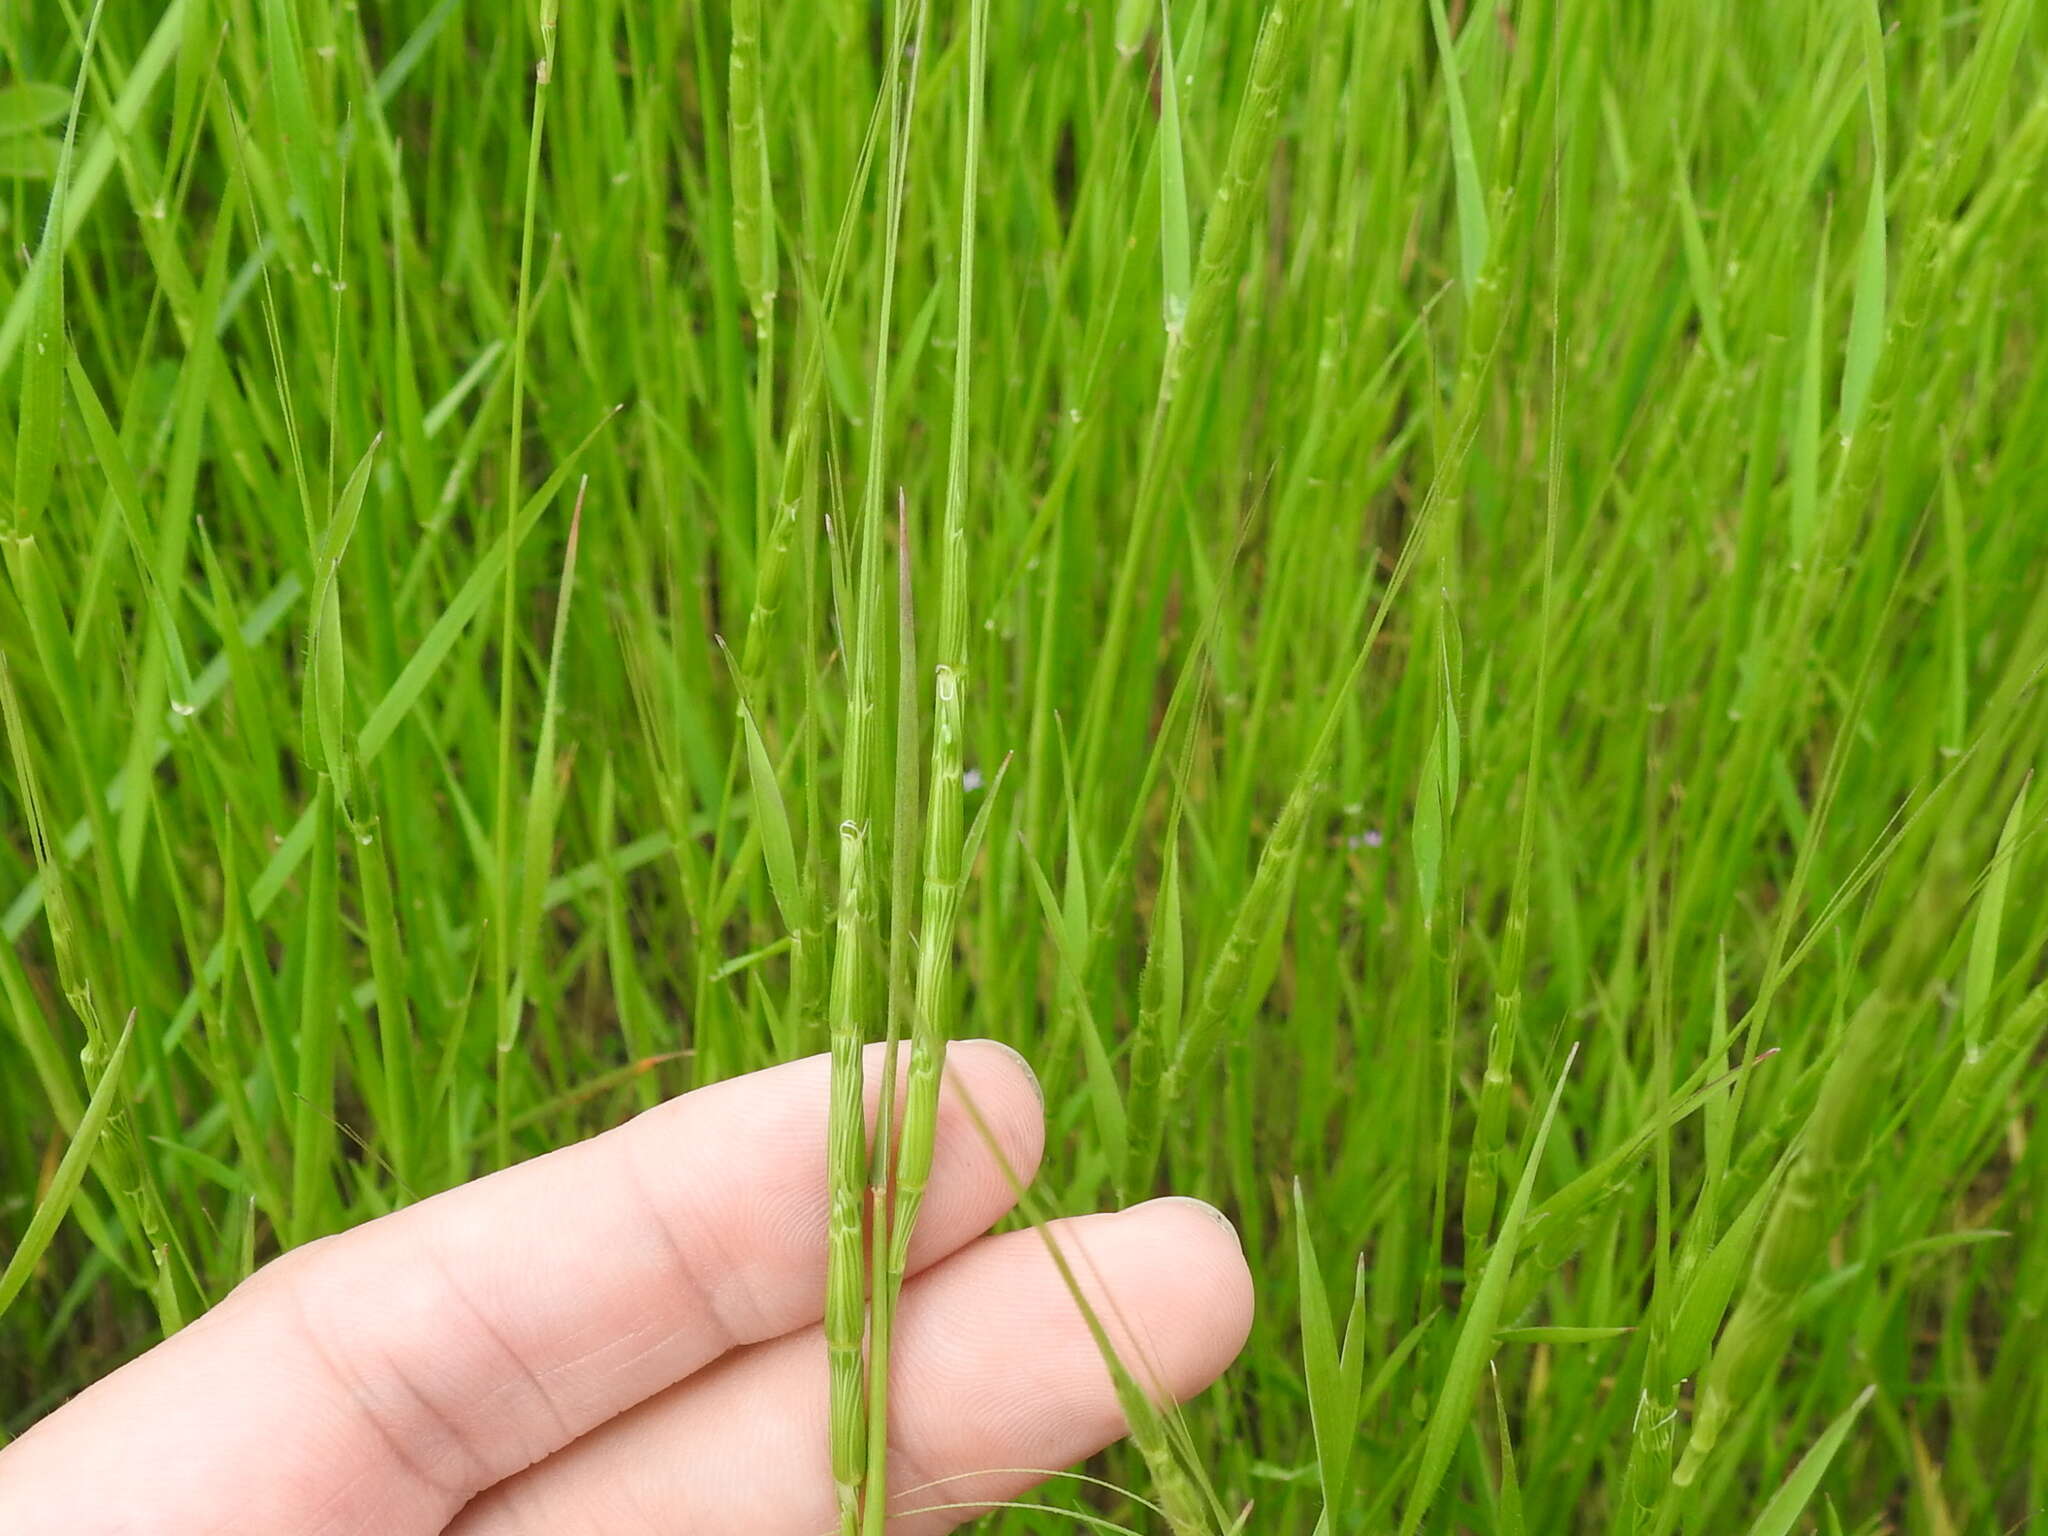 Image of jointed goatgrass